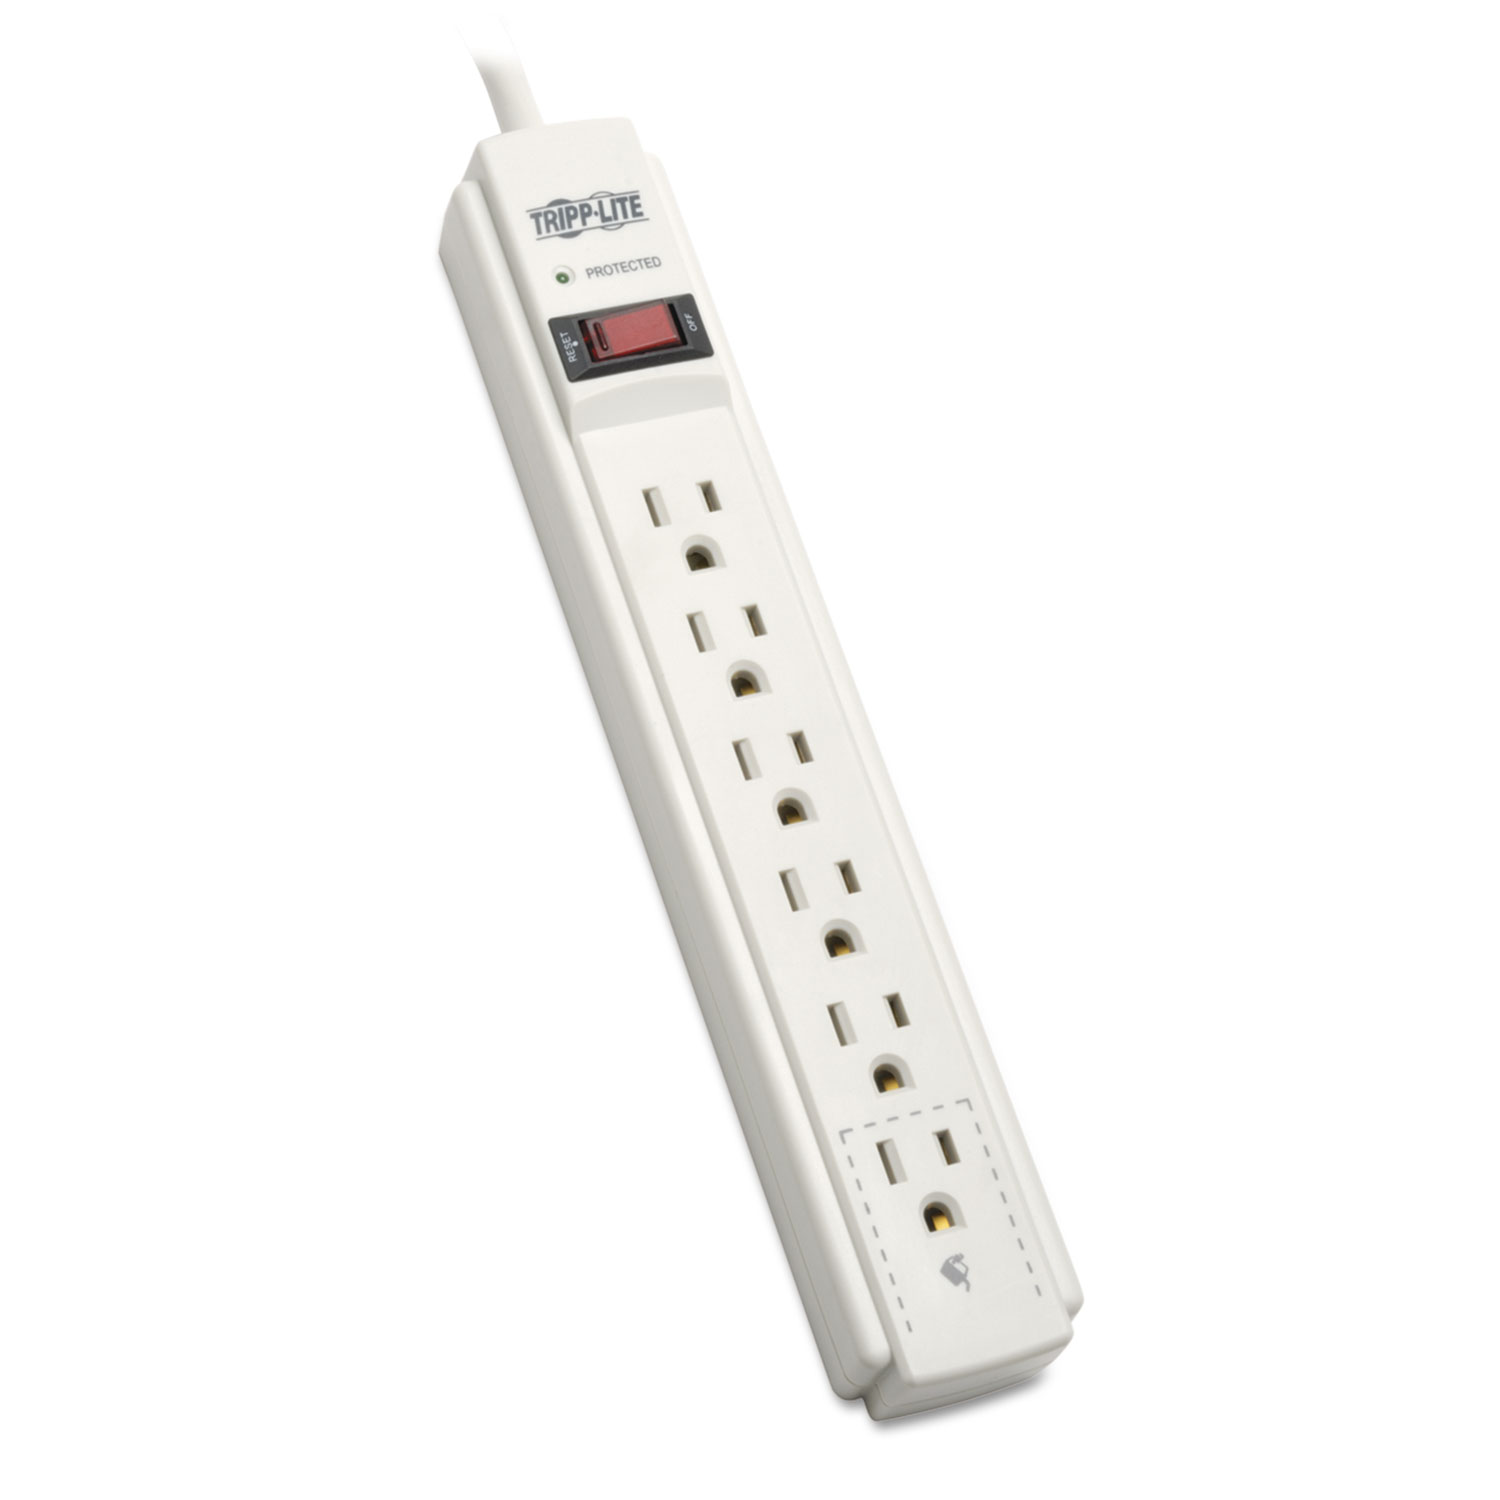 Protect It! Surge Protector, 6 Outlets, 6 ft. Cord, 790 Joules, Light Gray